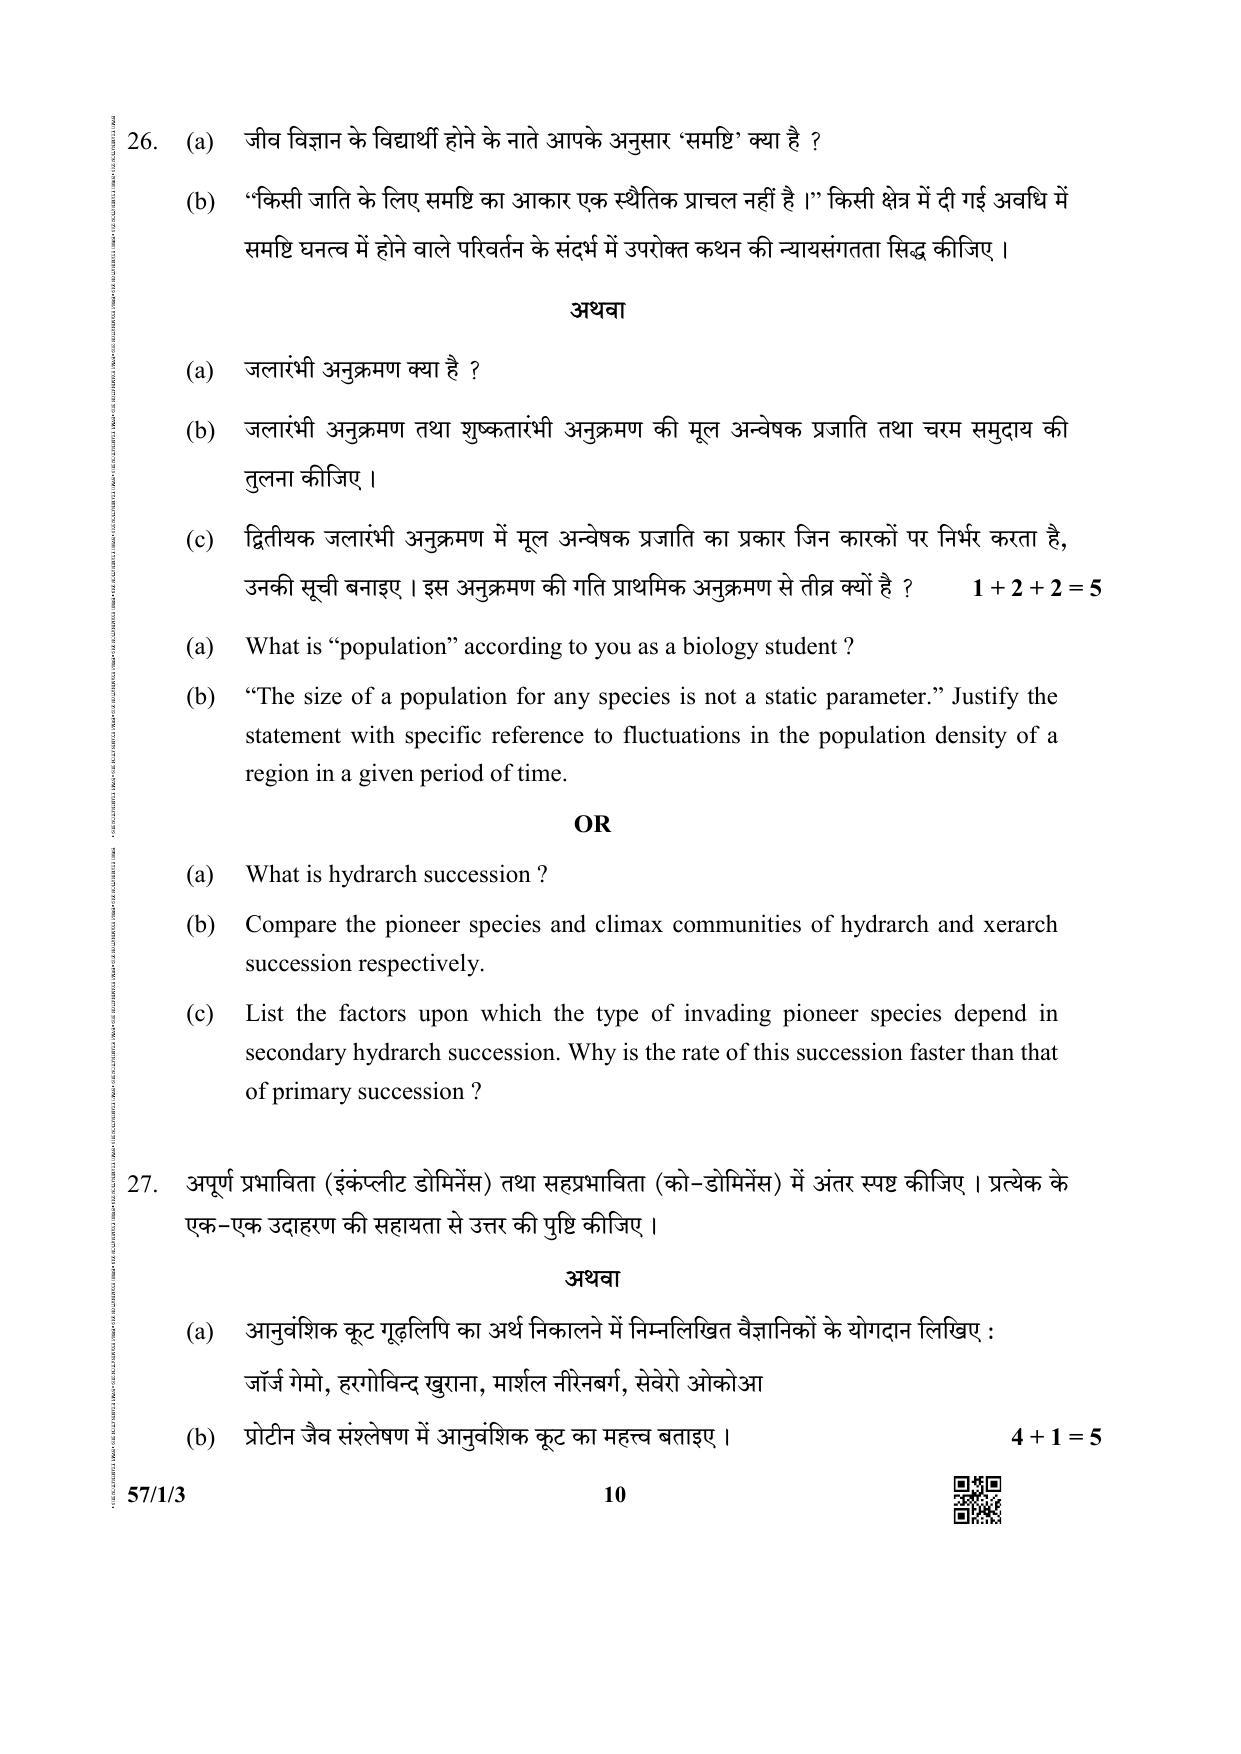 CBSE Class 12 57-3 (Biology) 2019 Question Paper - Page 10